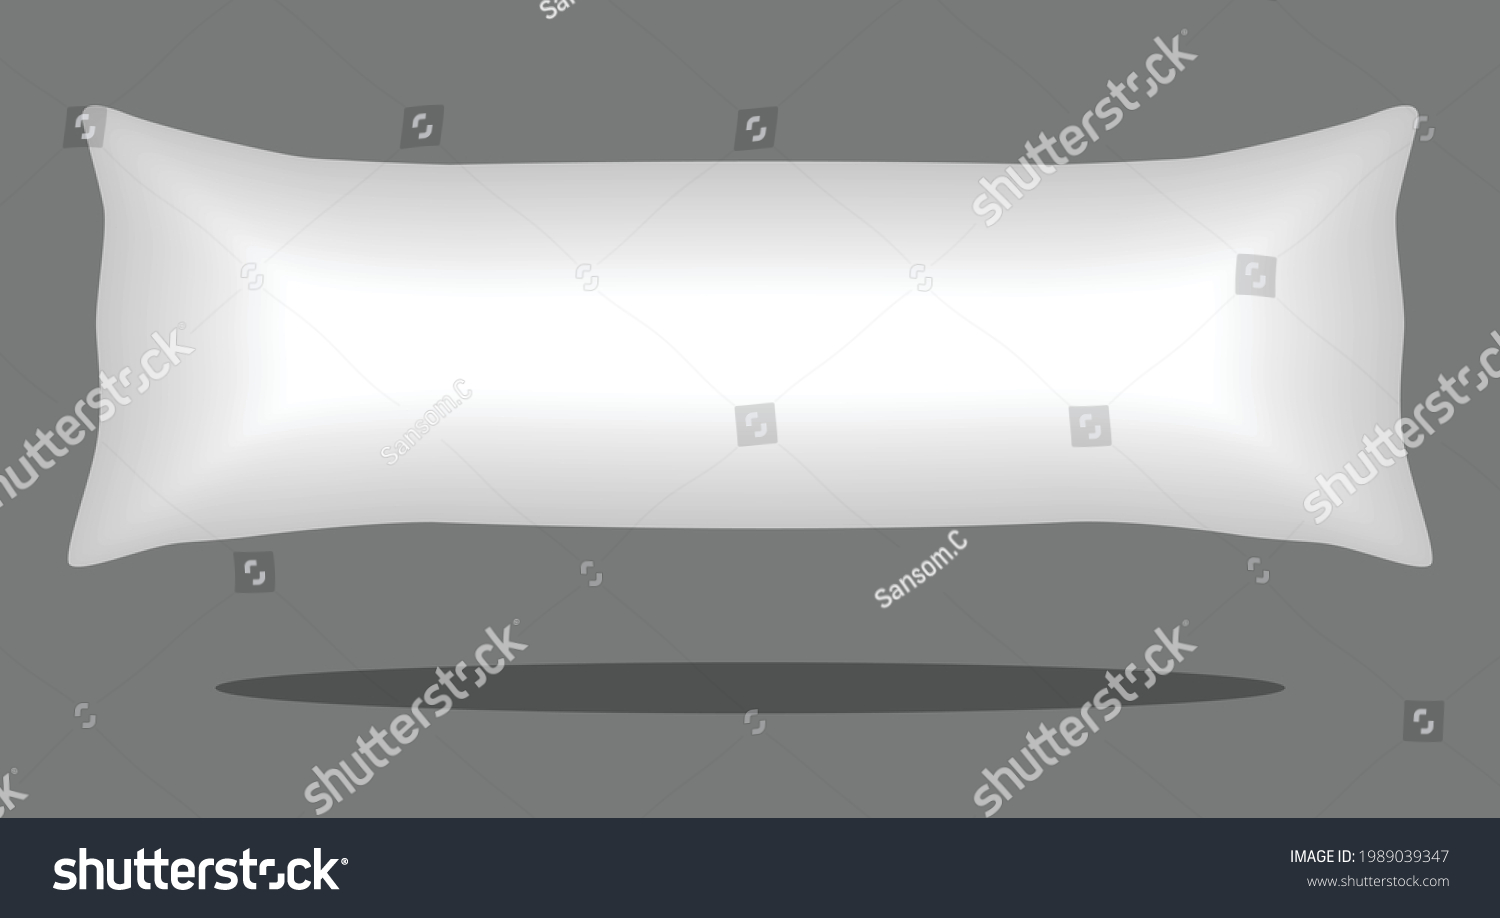 SVG of Blank White Long Body Pillow Template on Gray Background, Vector File. svg